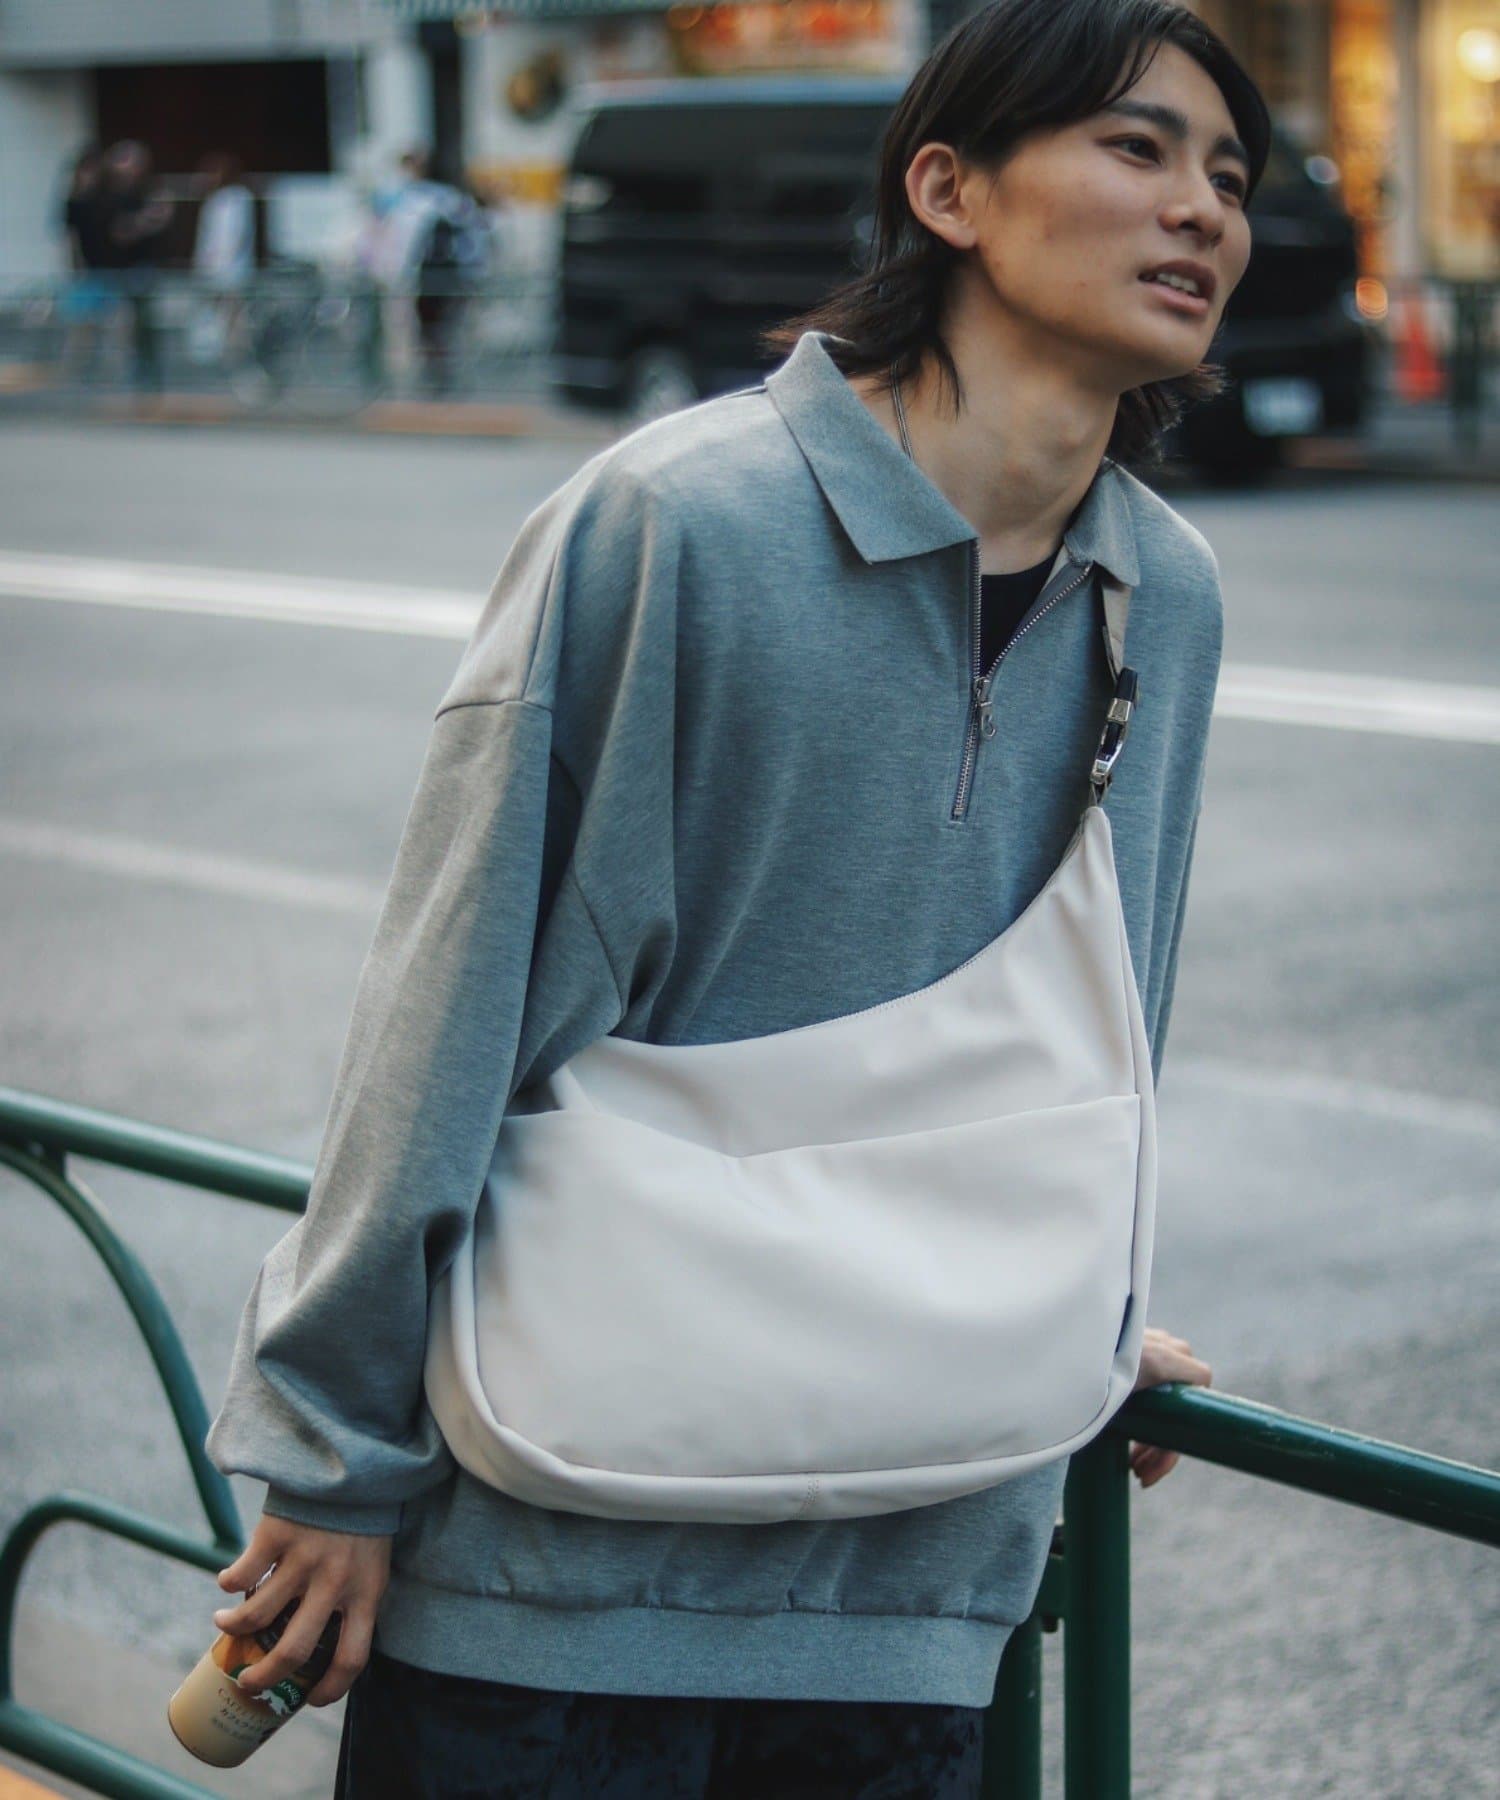 Lui's(ルイス) 【SML】Exclusive/ANYTIME SHOULDER BAG